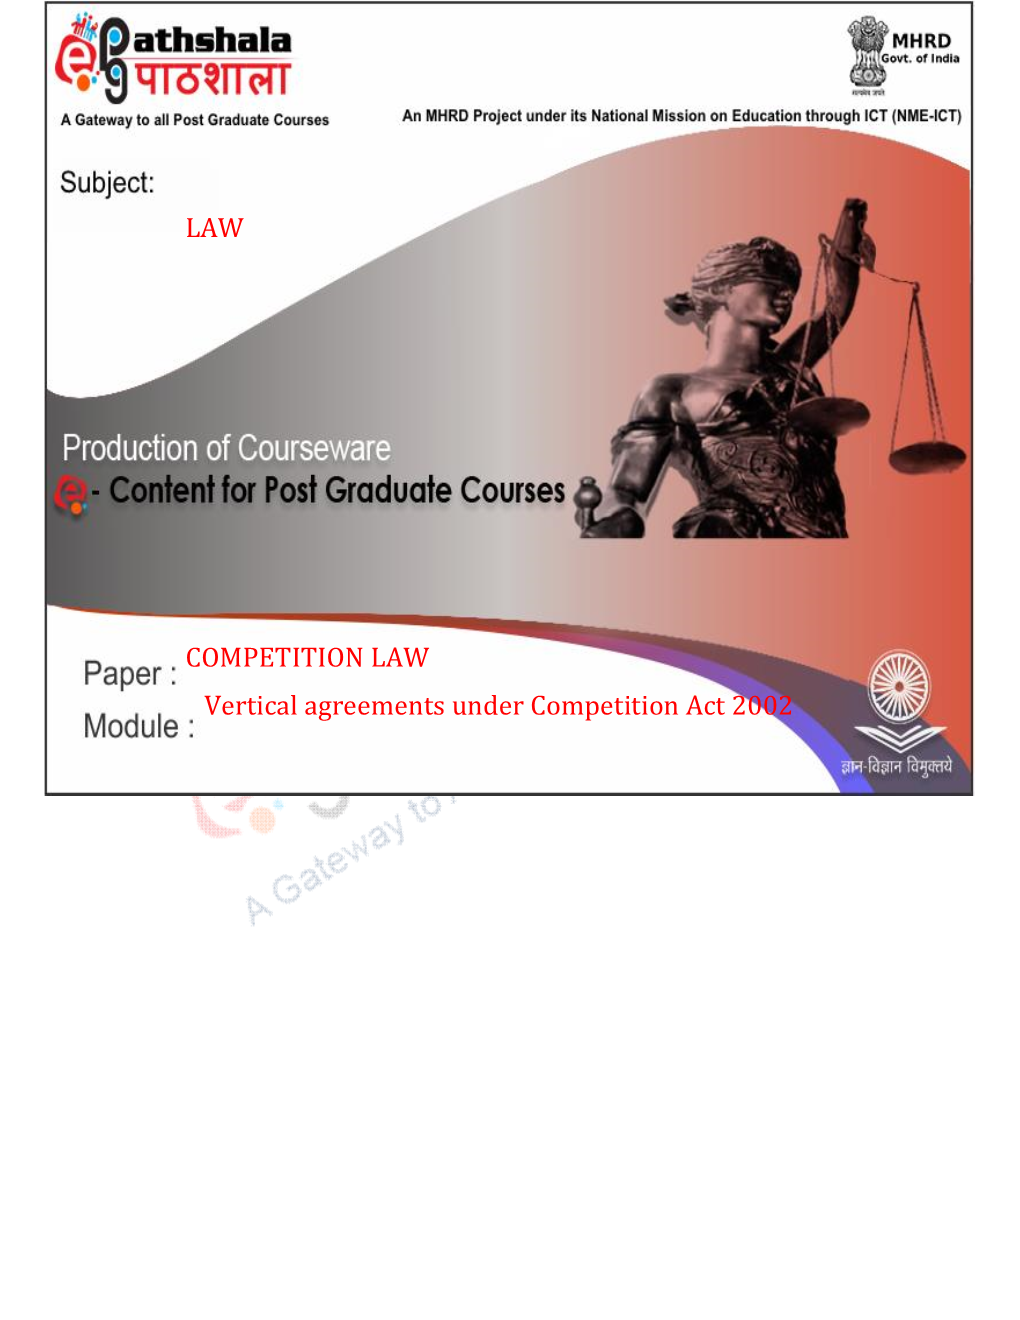 LAW COMPETITION LAW Vertical Agreements Under Competition Act